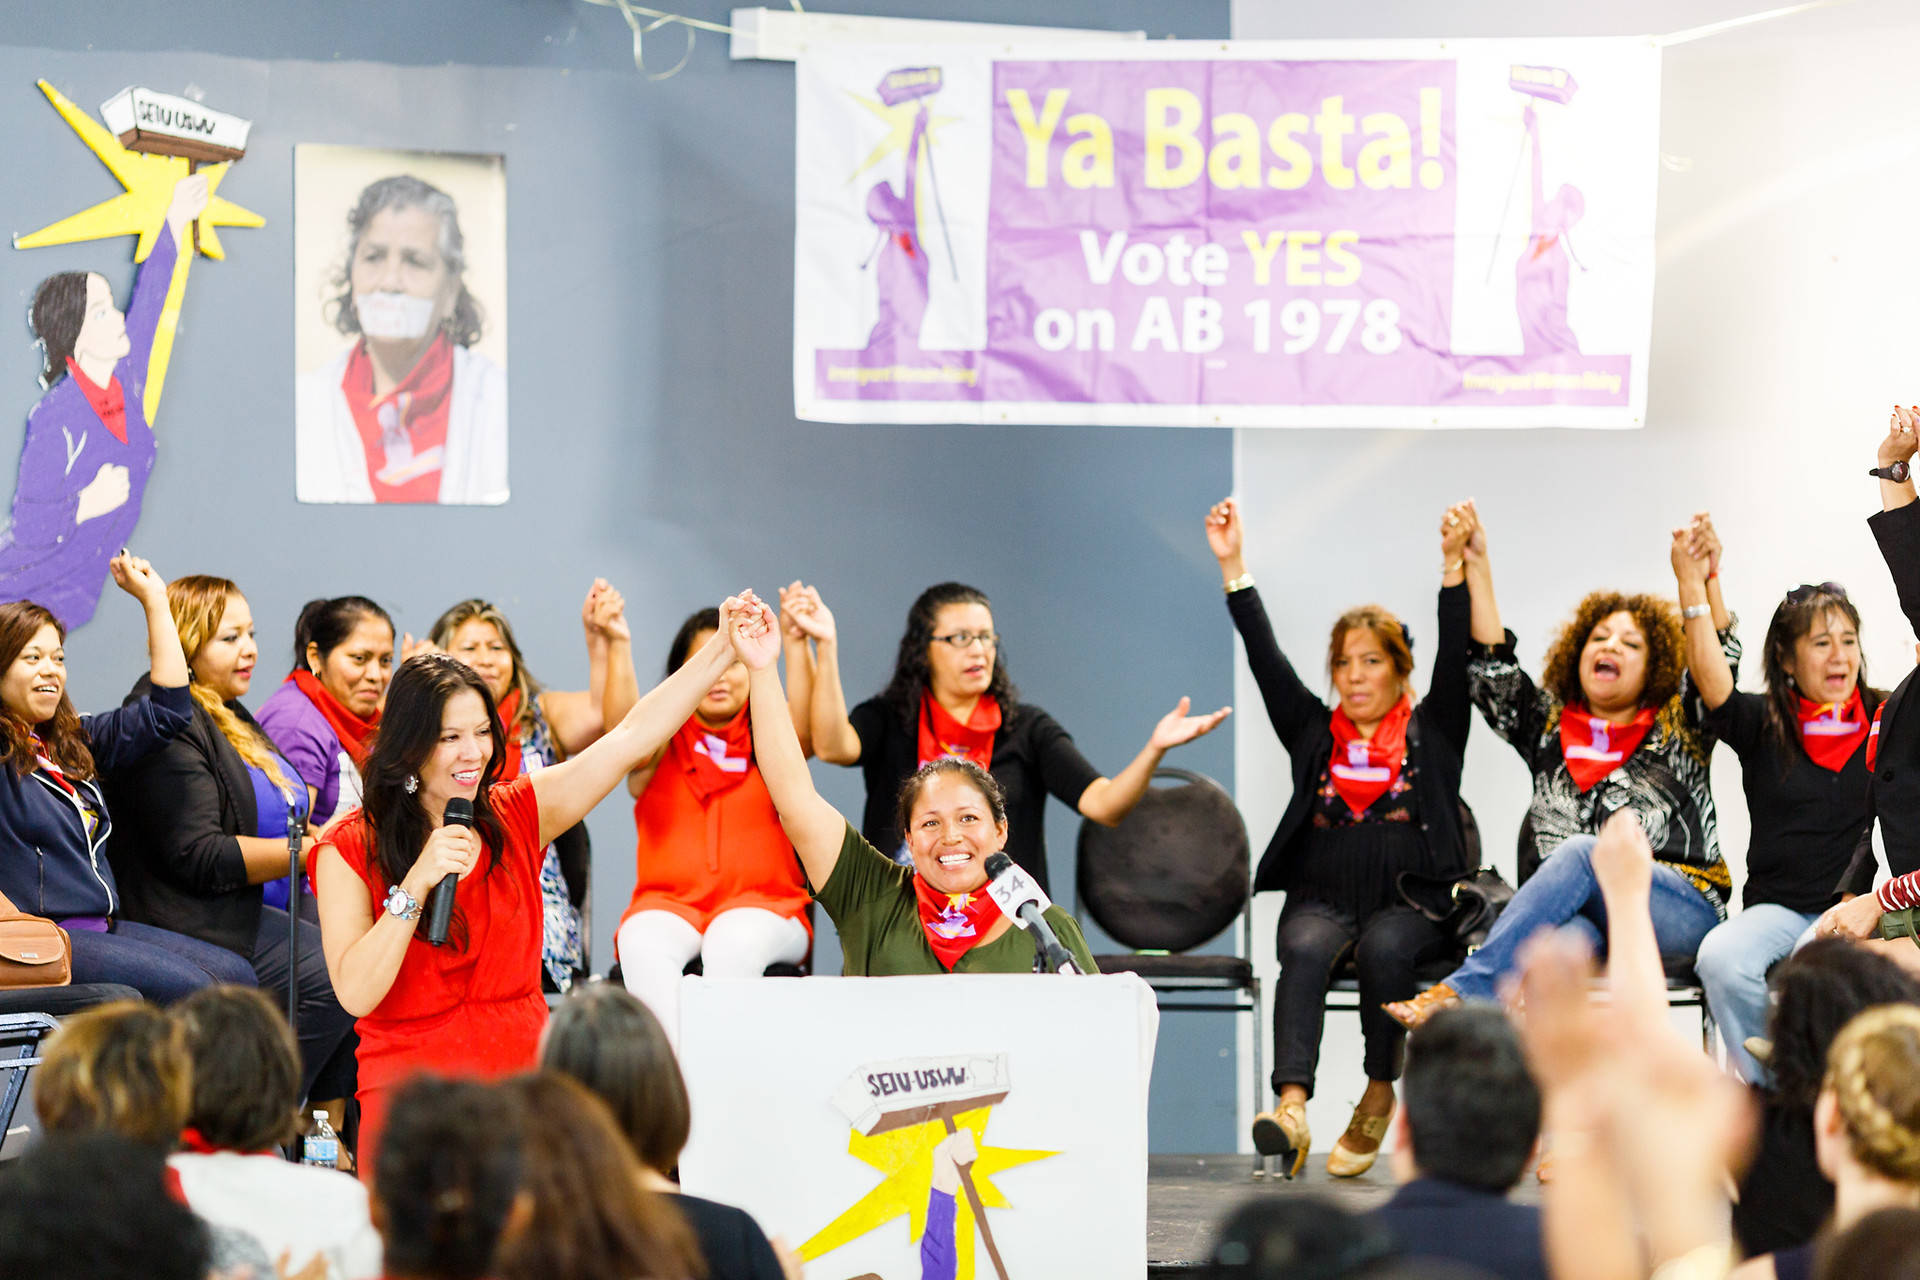 Georgina Hernandez, a janitor who was sexually assaulted on the job, leads members of the "Ya Basta" (enough is enough) coalition in a chant, urging the passage of AB 1978 to increase protections for janitors. Alejandra Valles